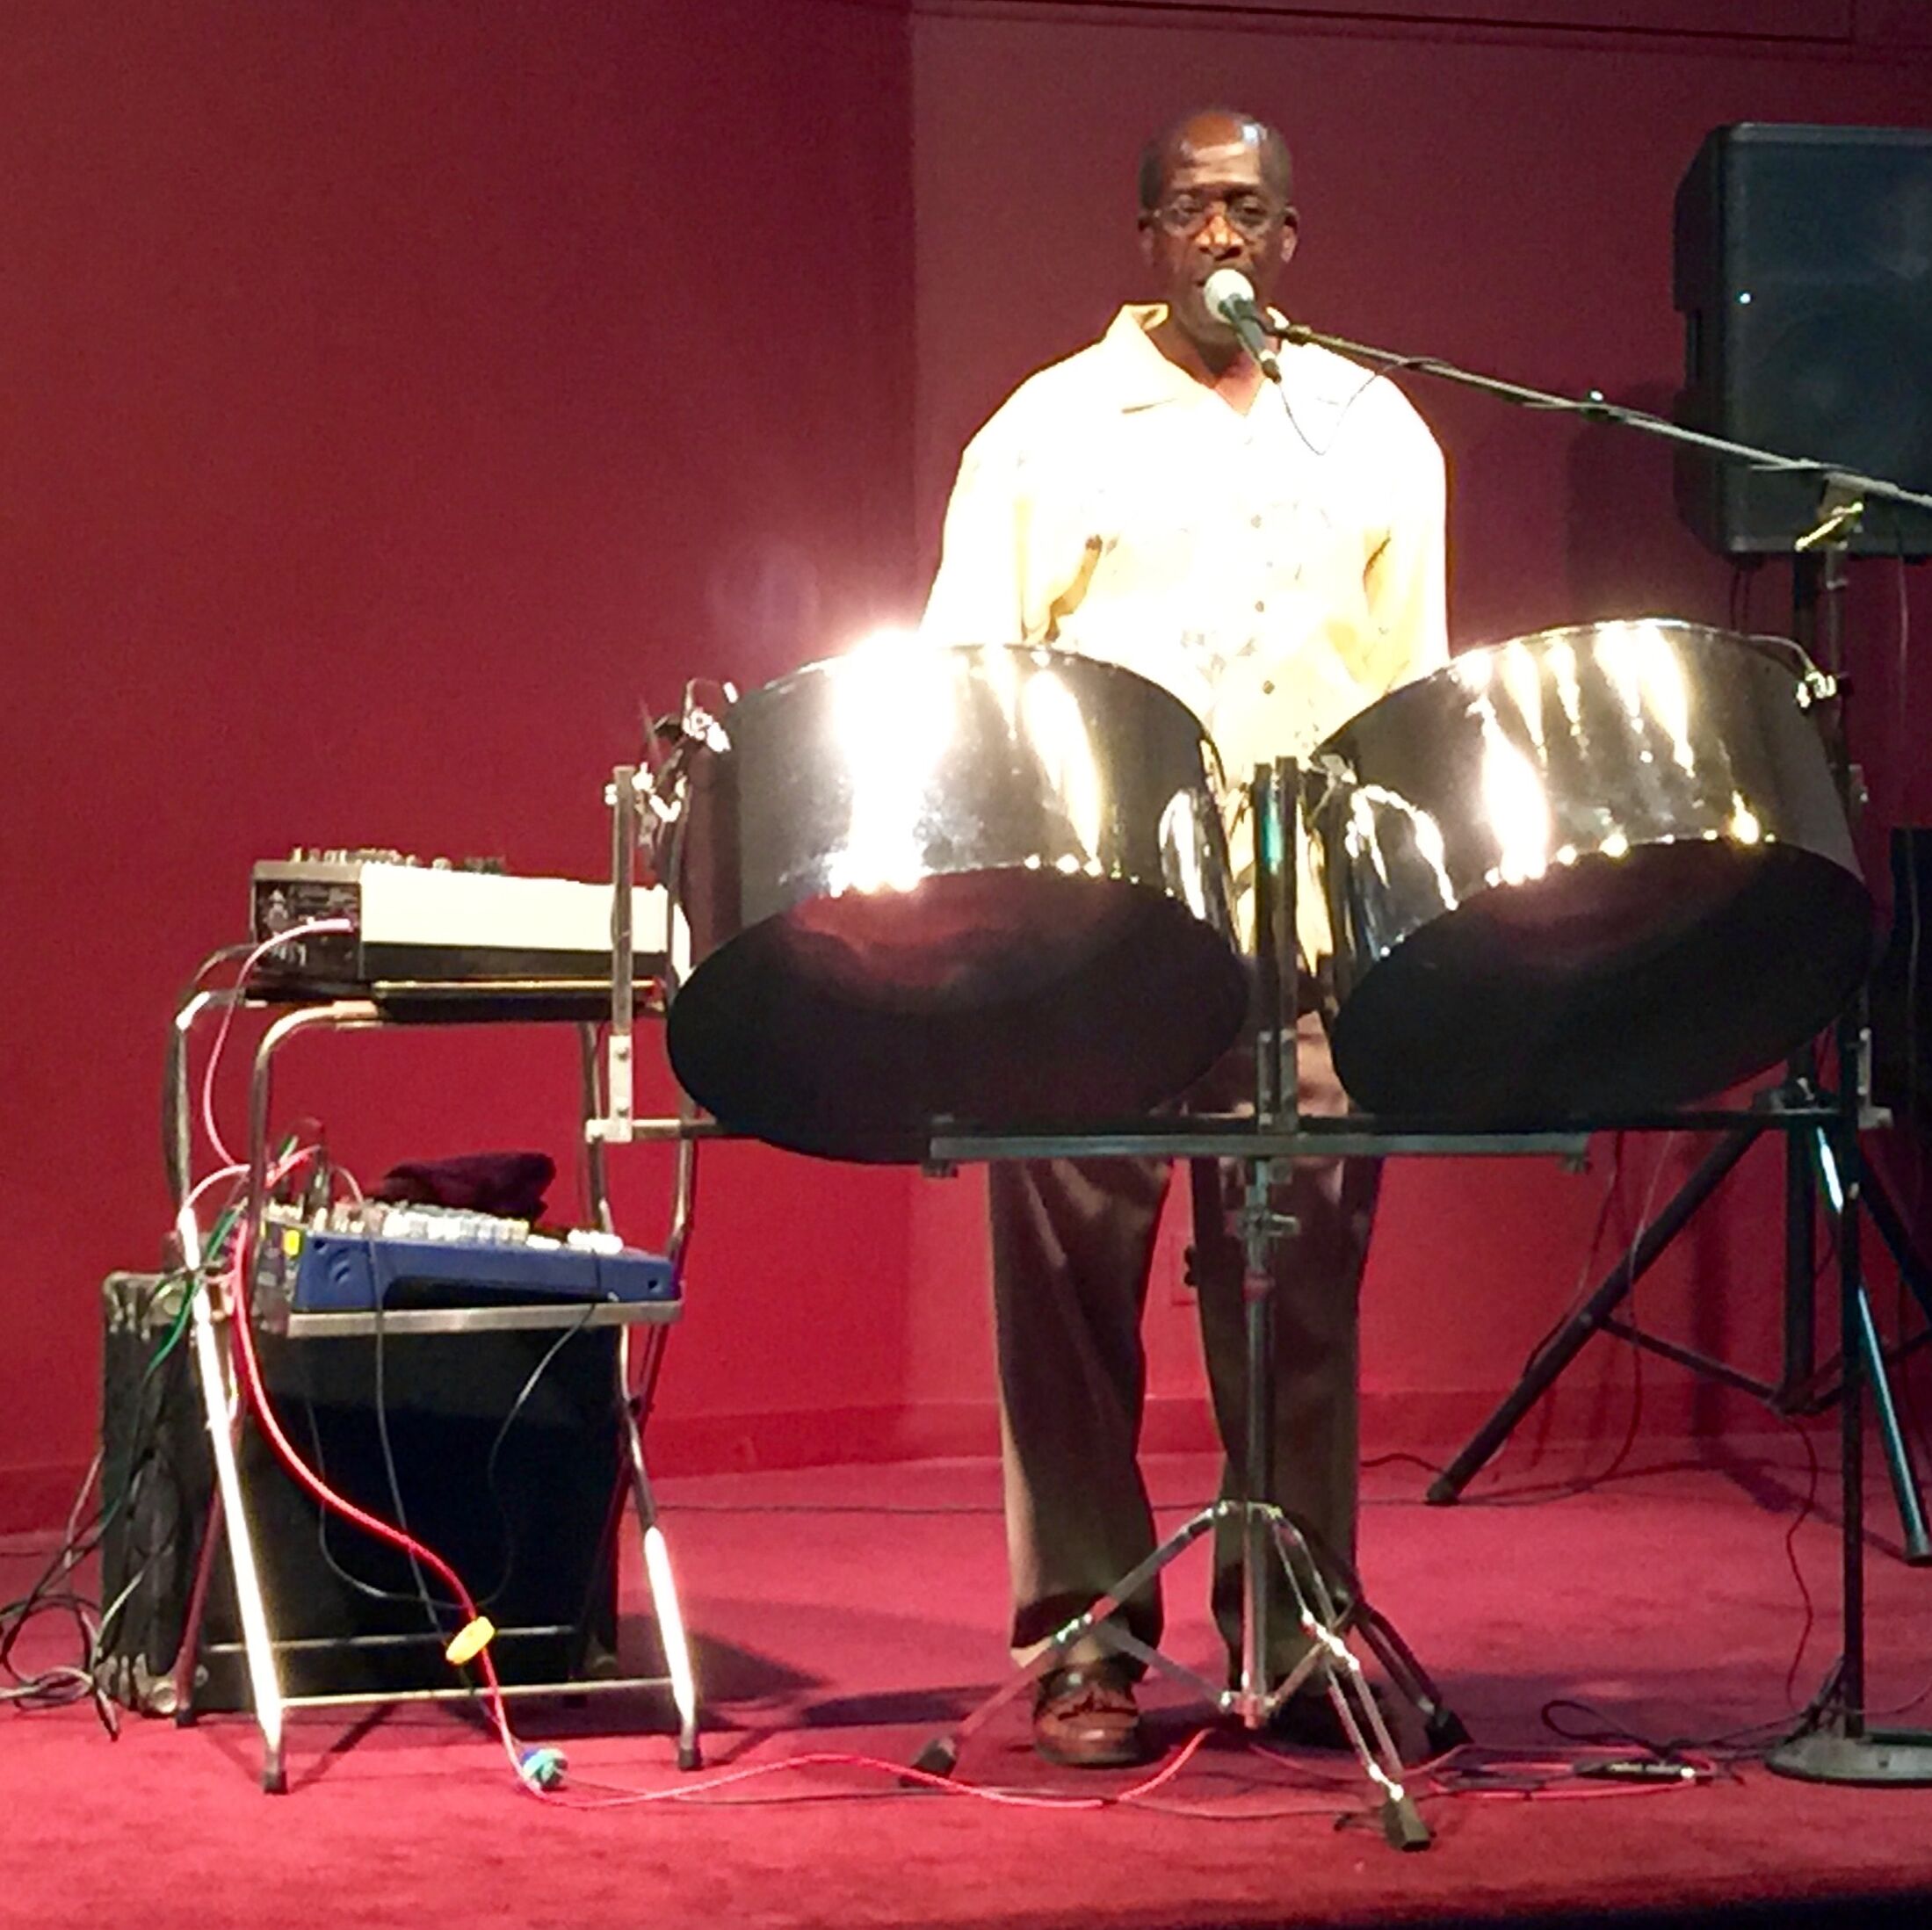 Pan Loco's live steel drums at Time Out Market Boston